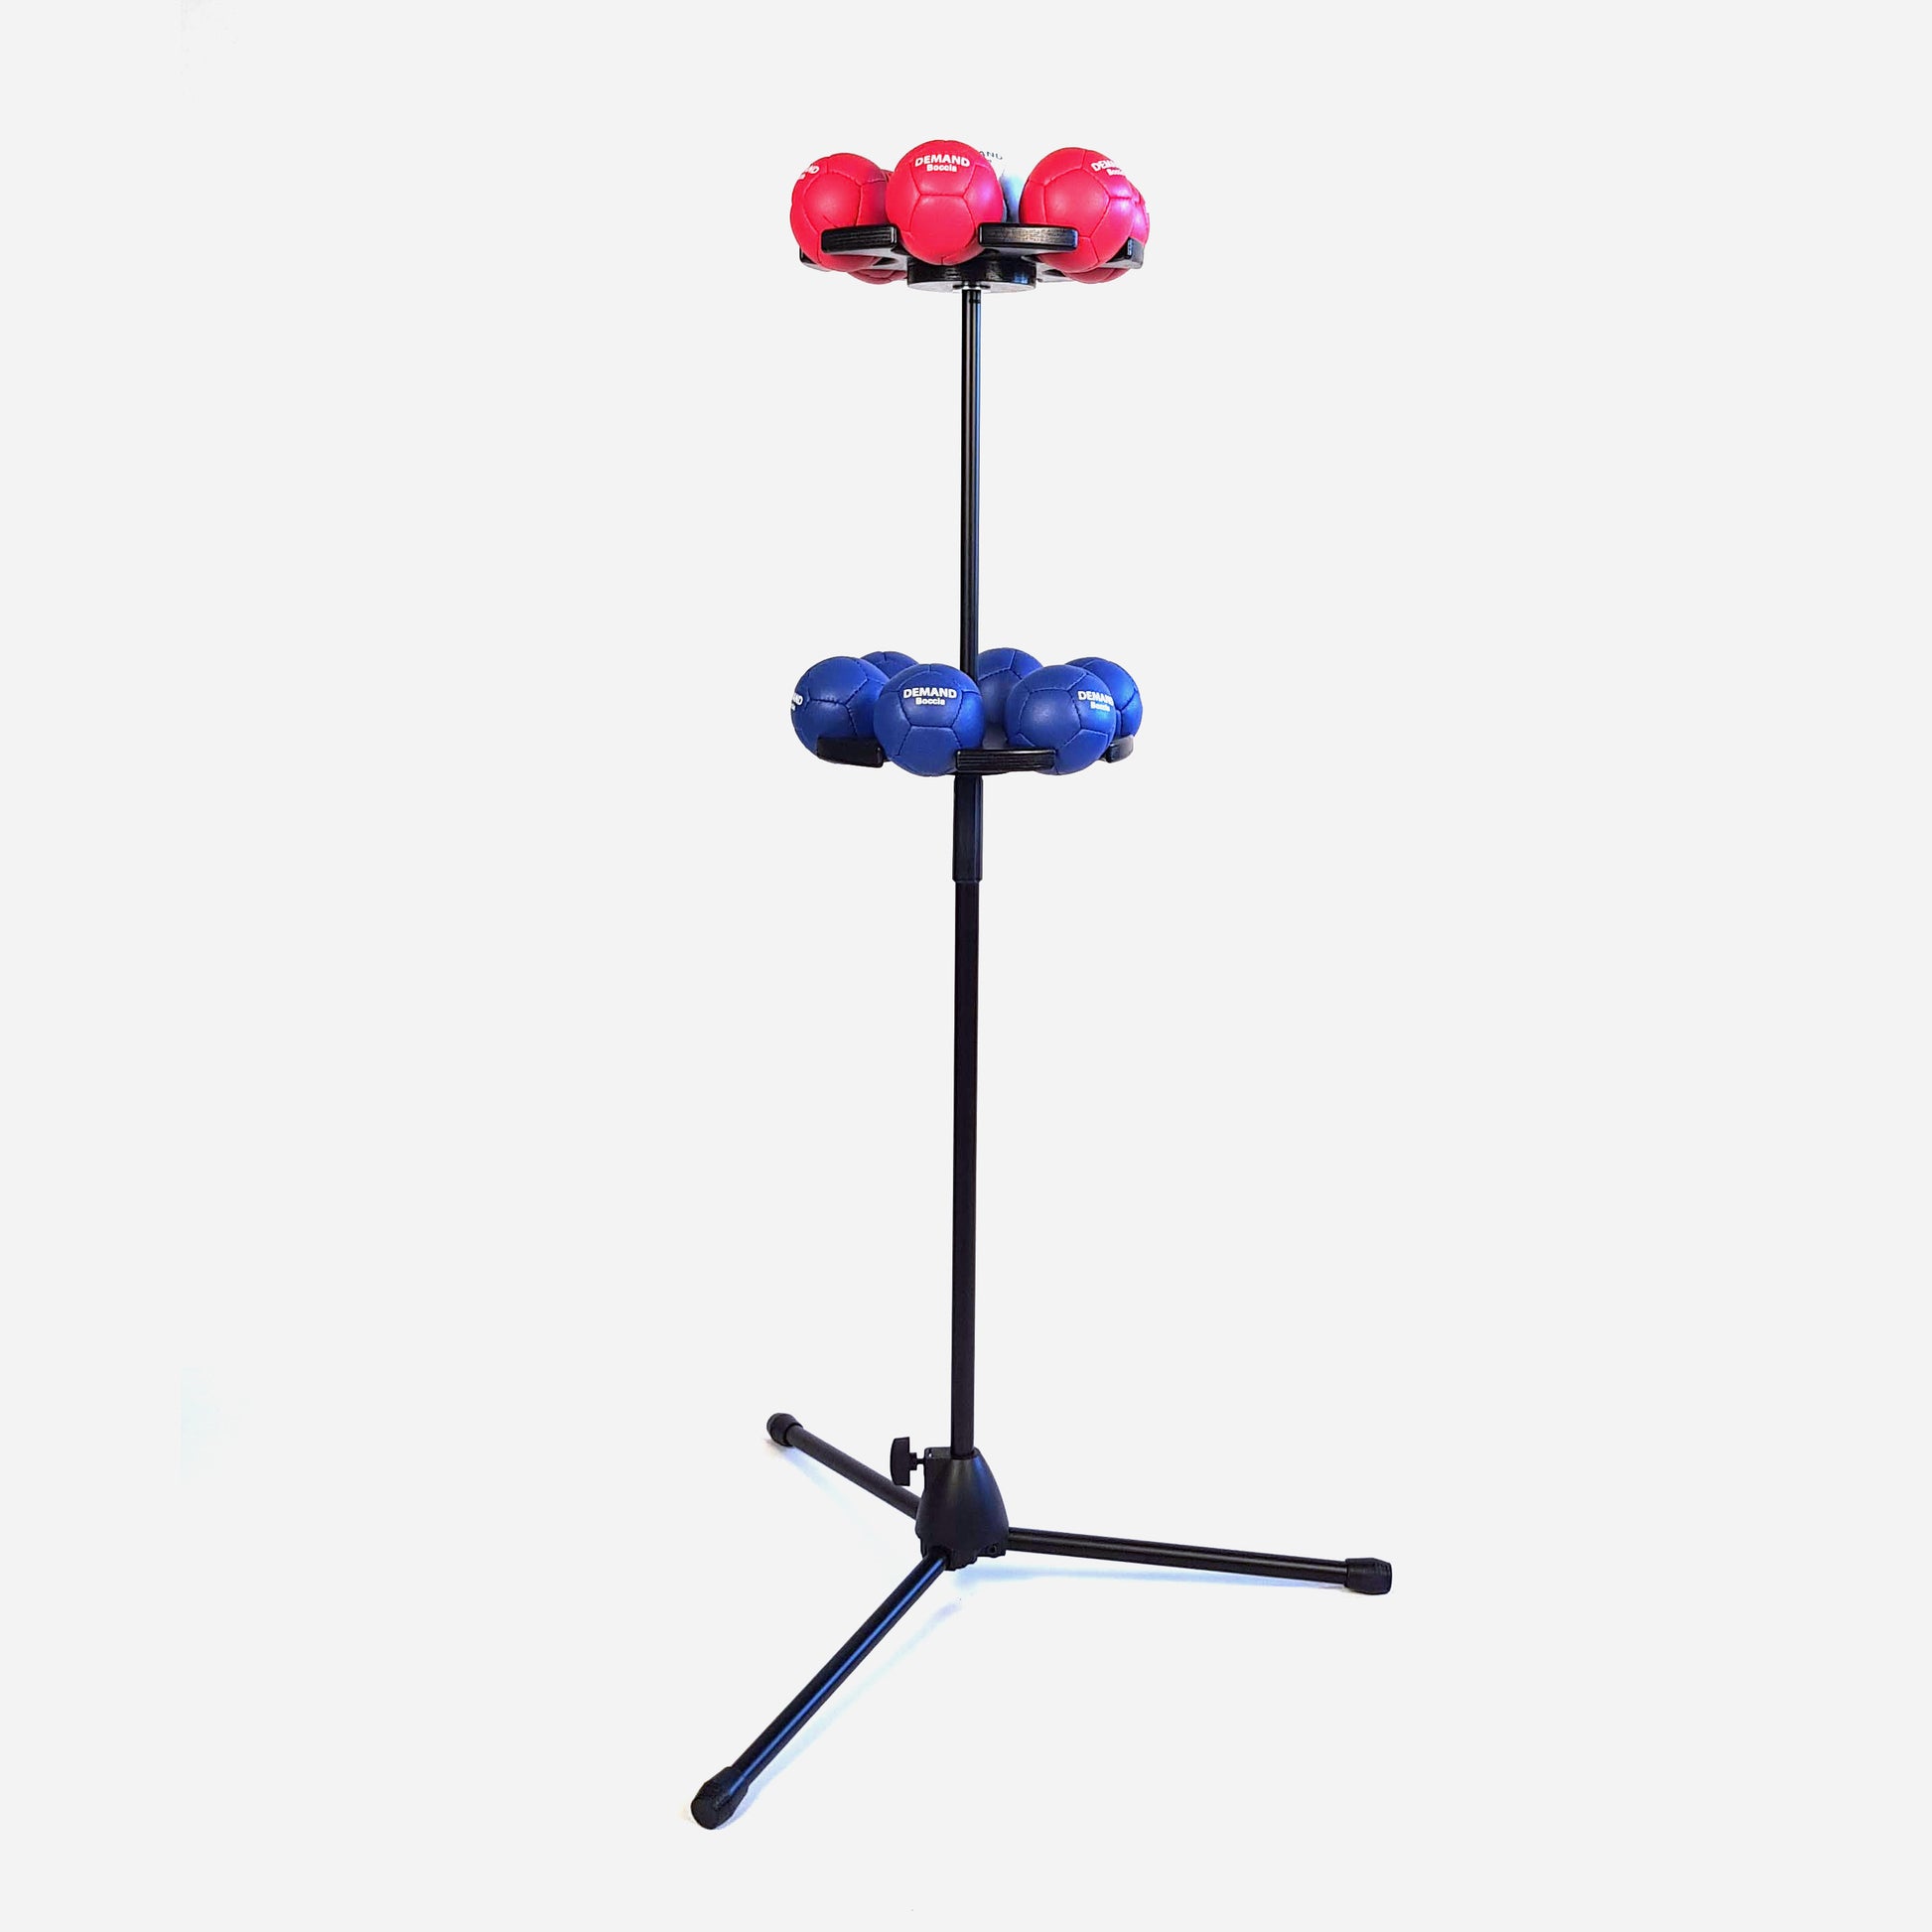 Side view of boccia ball stand with balls at highest extension setting